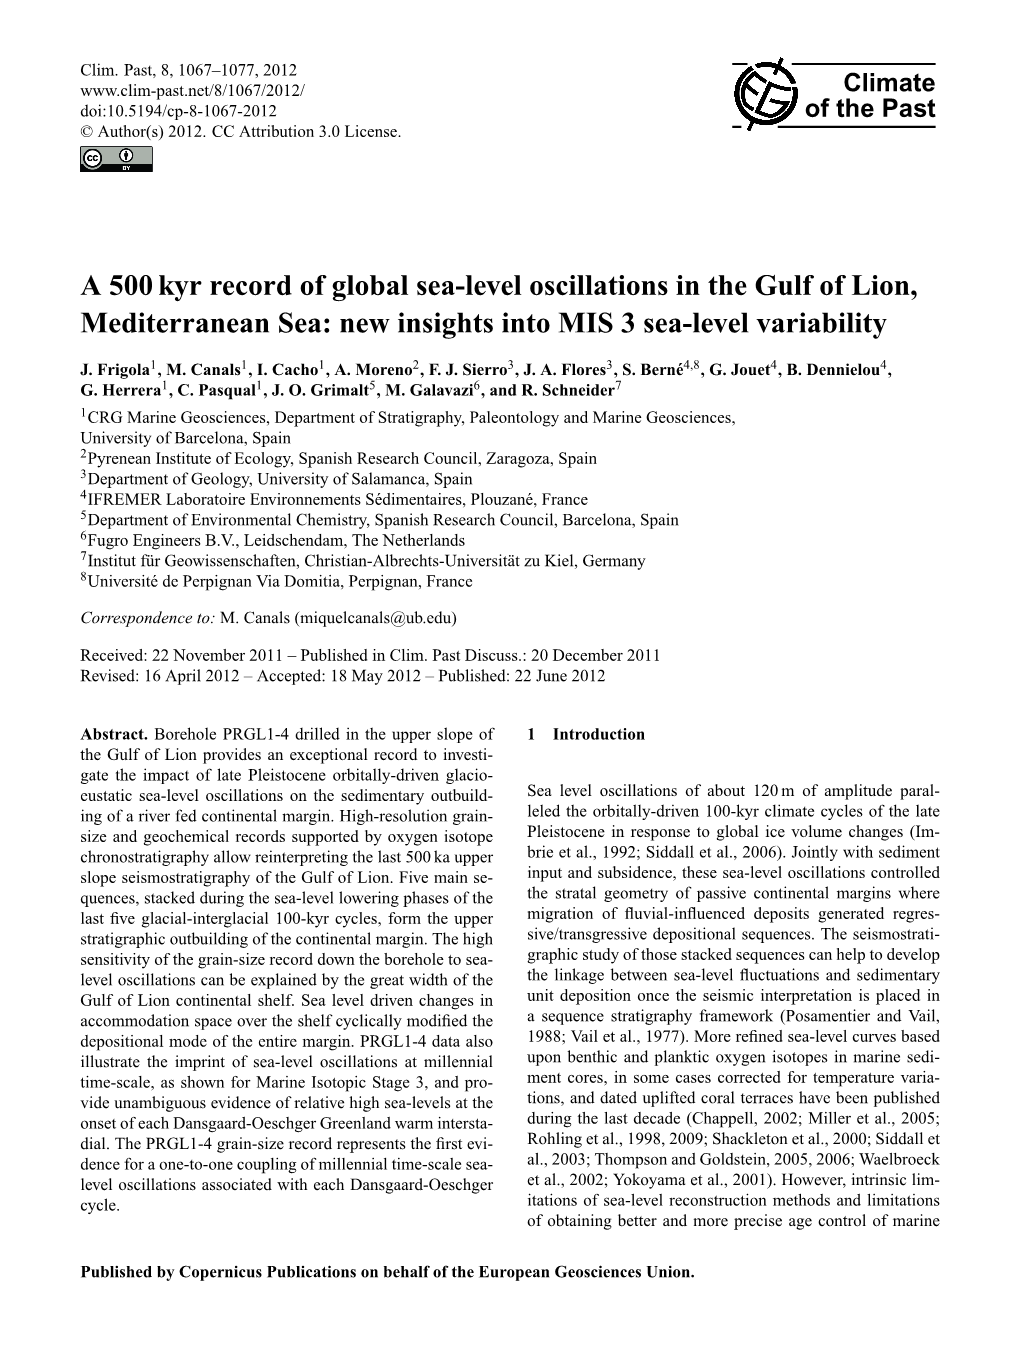 A 500 Kyr Record of Global Sea-Level Oscillations in the Gulf of Lion, Mediterranean Sea: New Insights Into MIS 3 Sea-Level Variability